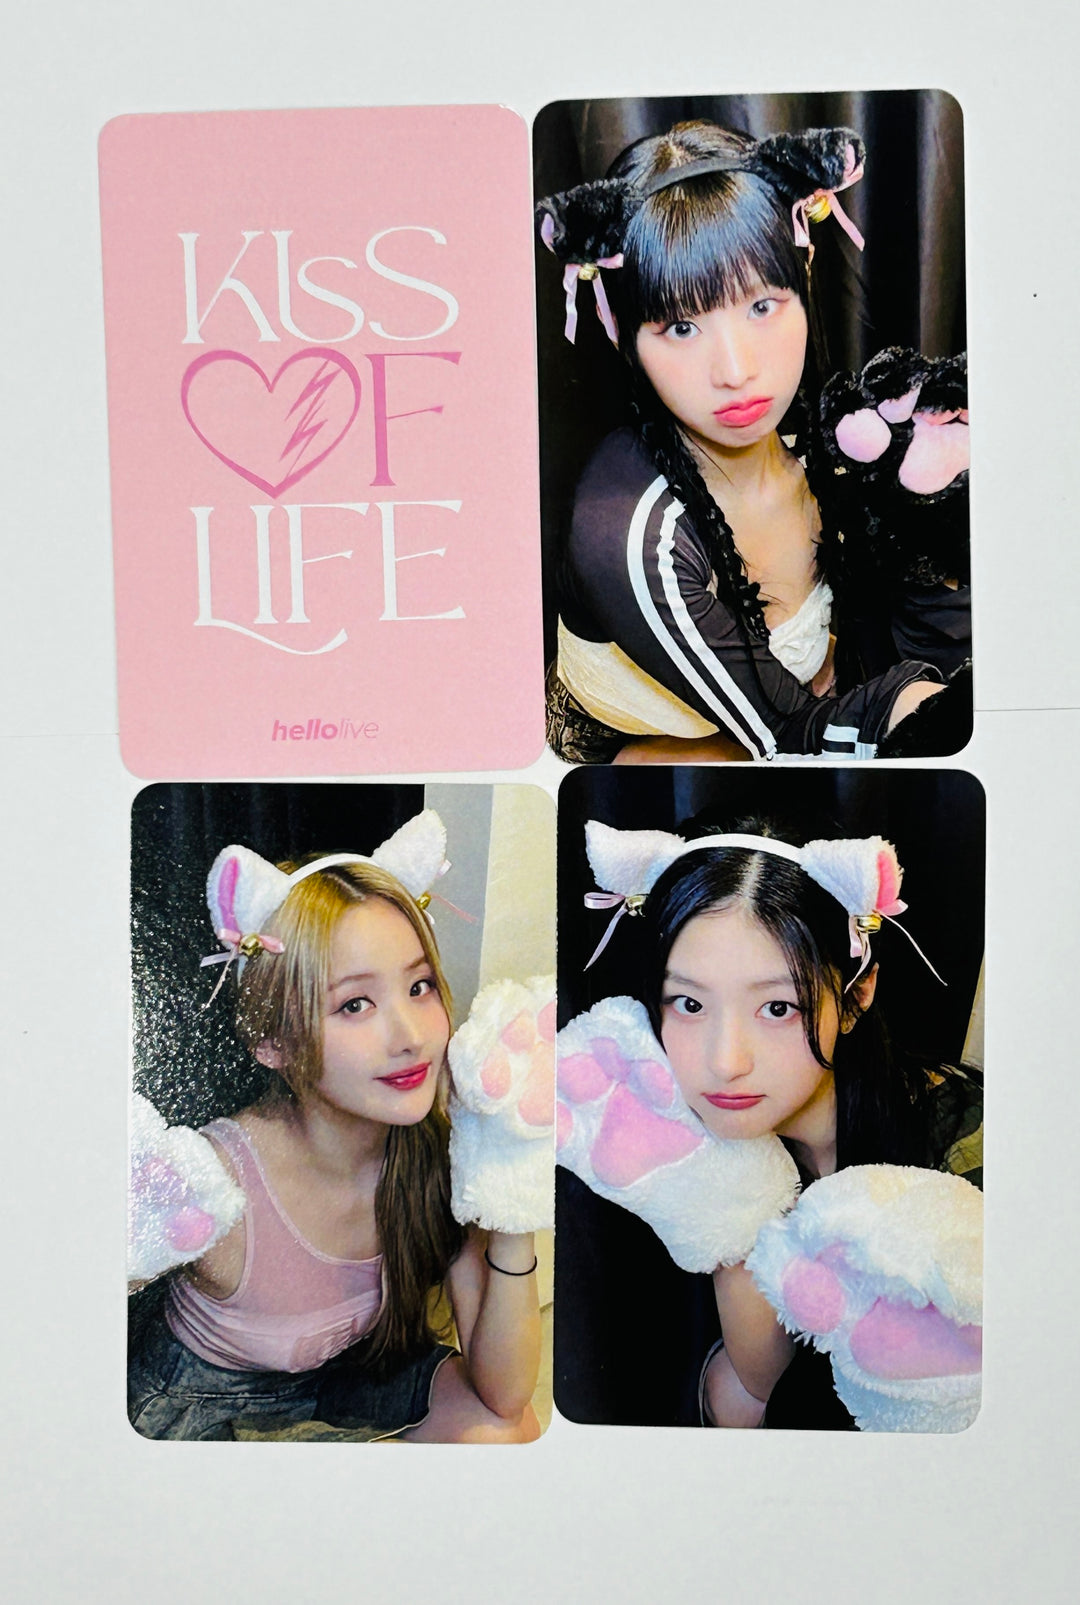 KISS OF LIFE "Midas Touch" - Hello Live Fansign Event Photocard Round 2 [24.6.7]